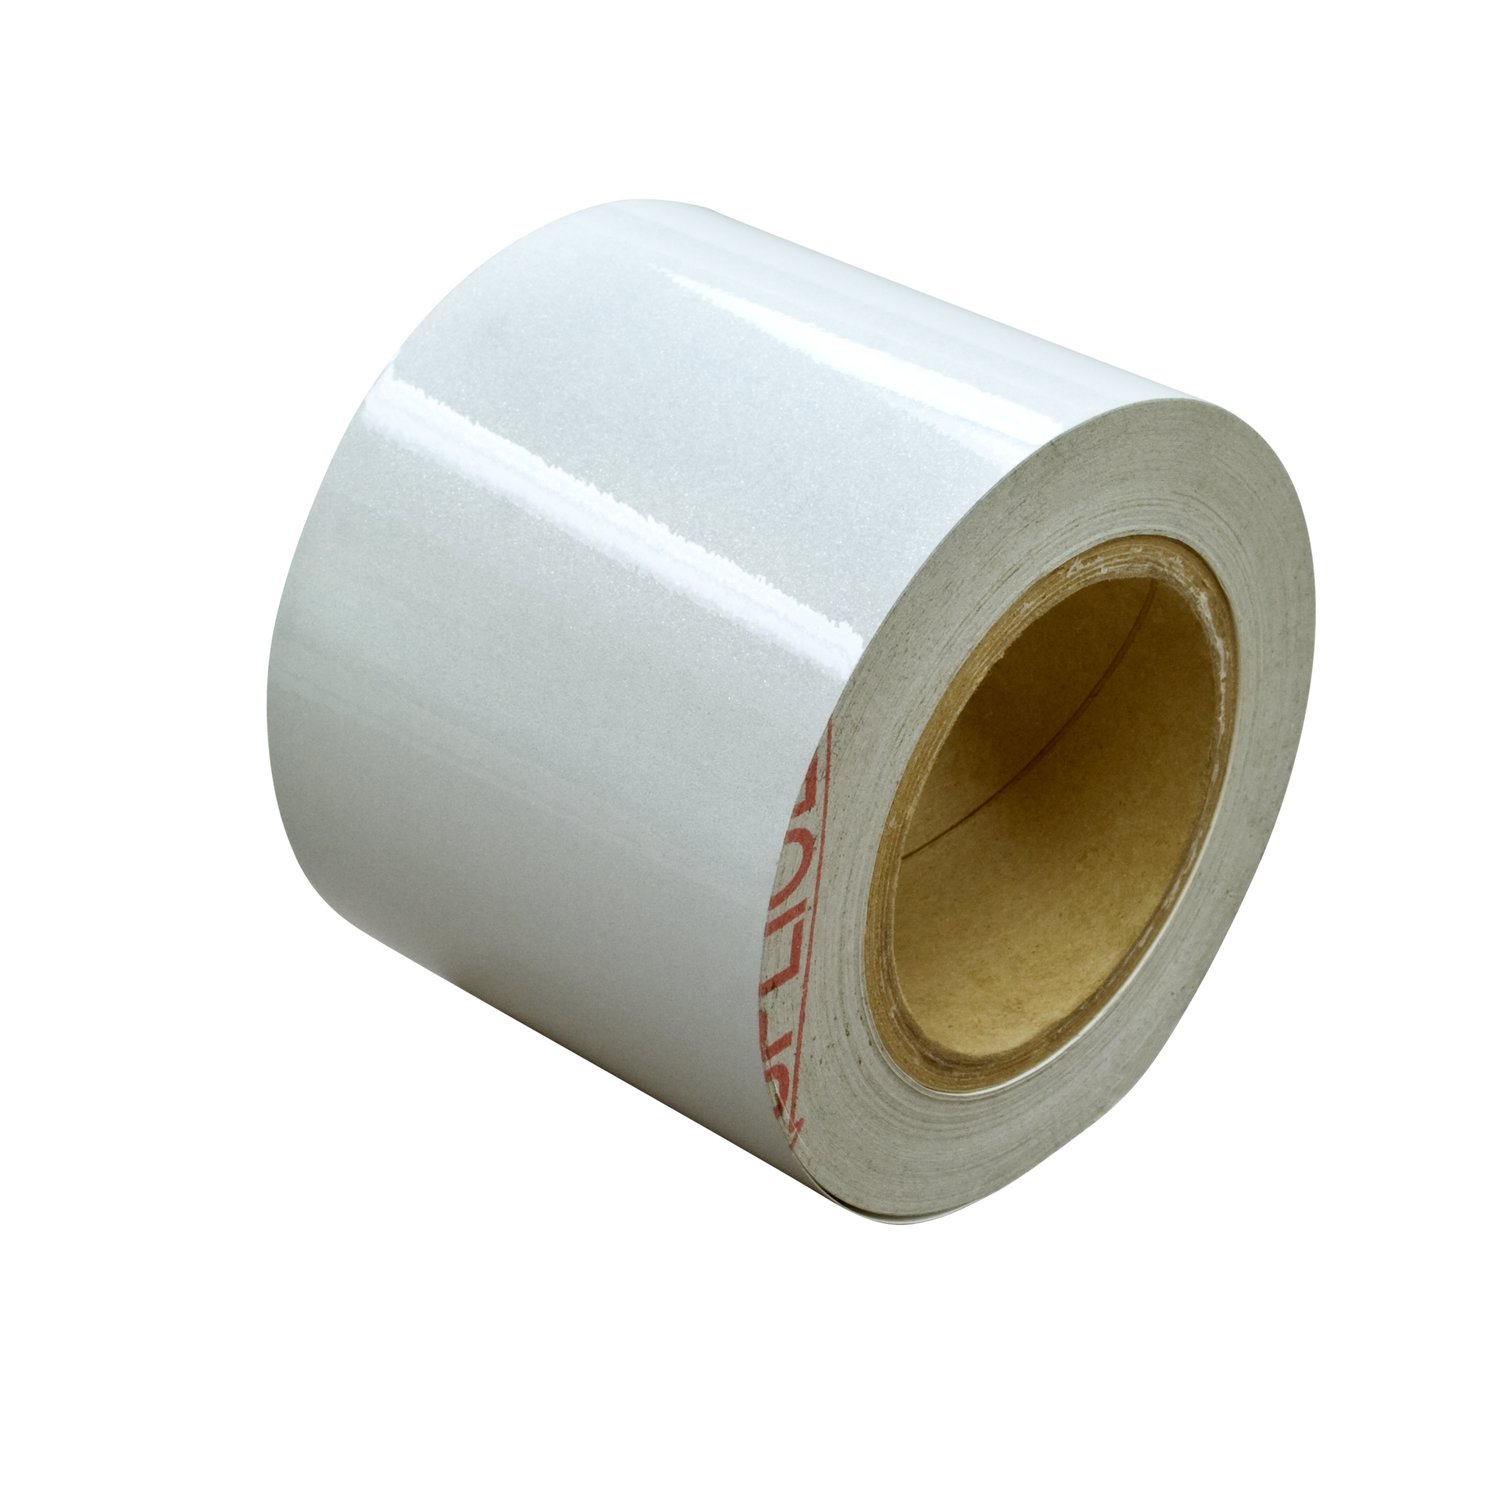 7000048587 - 3M Thermal Transfer Label Material 3929, Bright Silver Gloss, 6 in x
150 yd, 1 Roll/Case